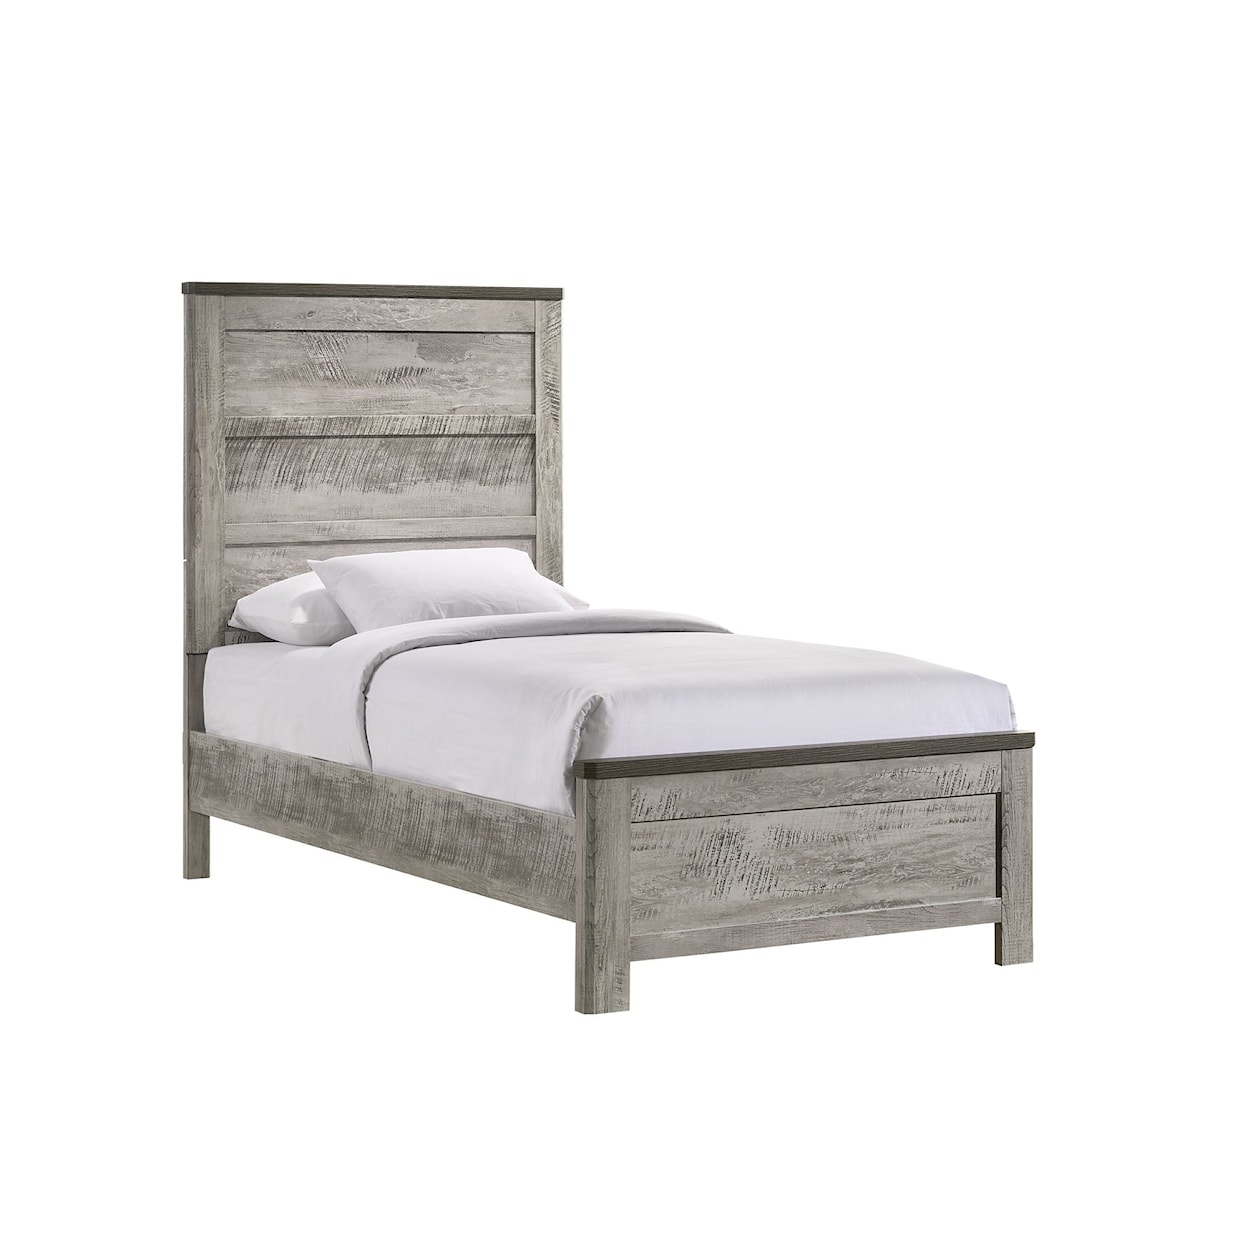 Elements International Millers Cove- Millers Cove Twin 3PC Bedroom Set